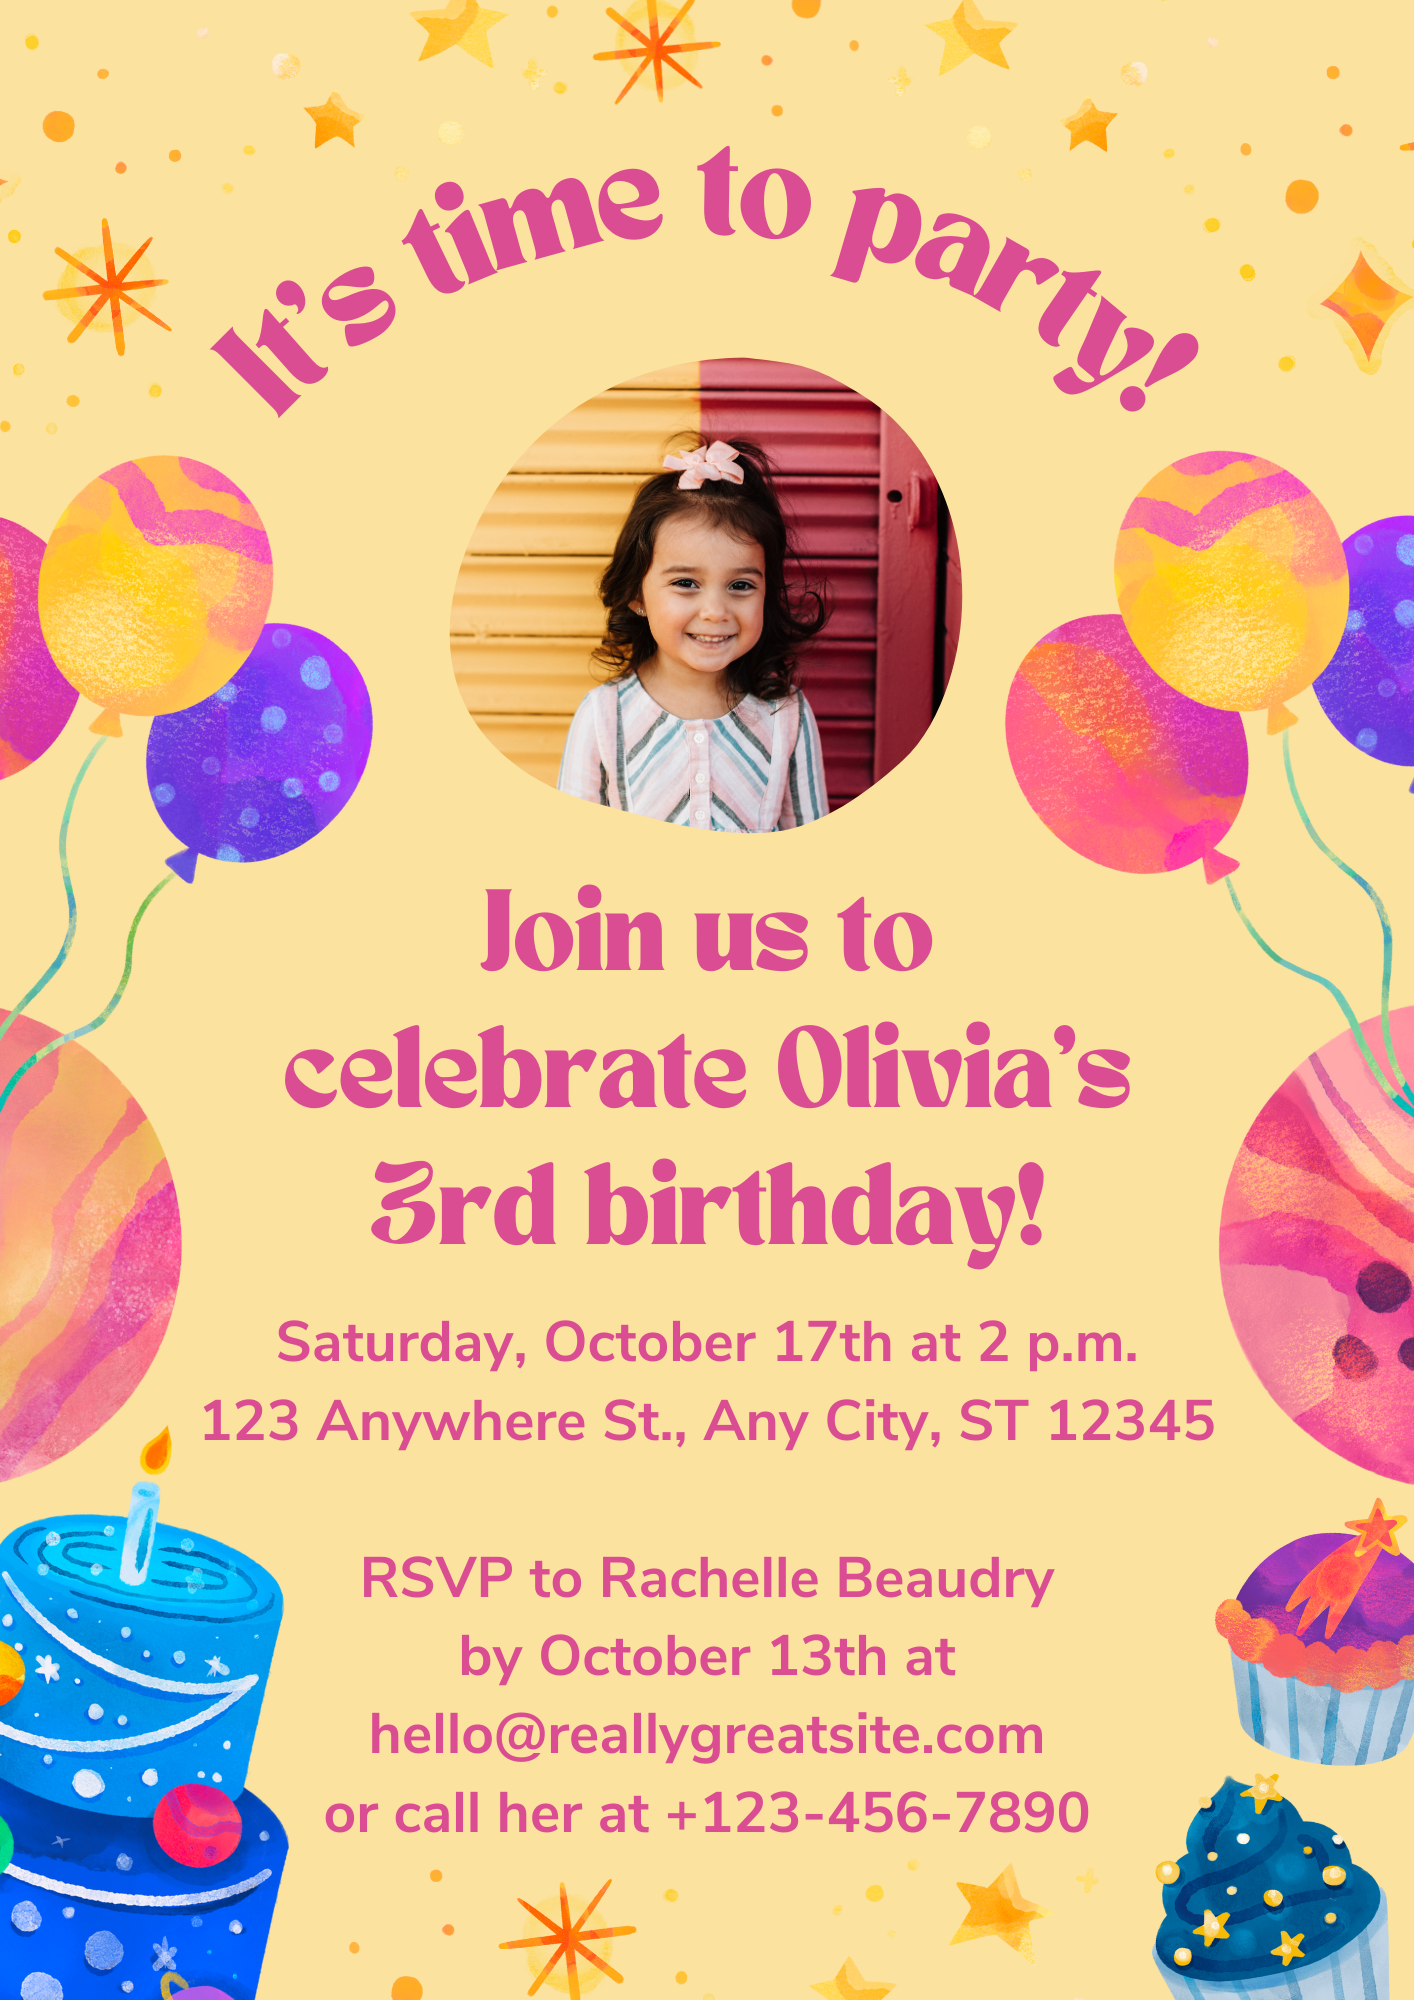 Flyer 10 - Pink Yellow Colorful Creative Fun Birthday Party Invitation Flyer.png